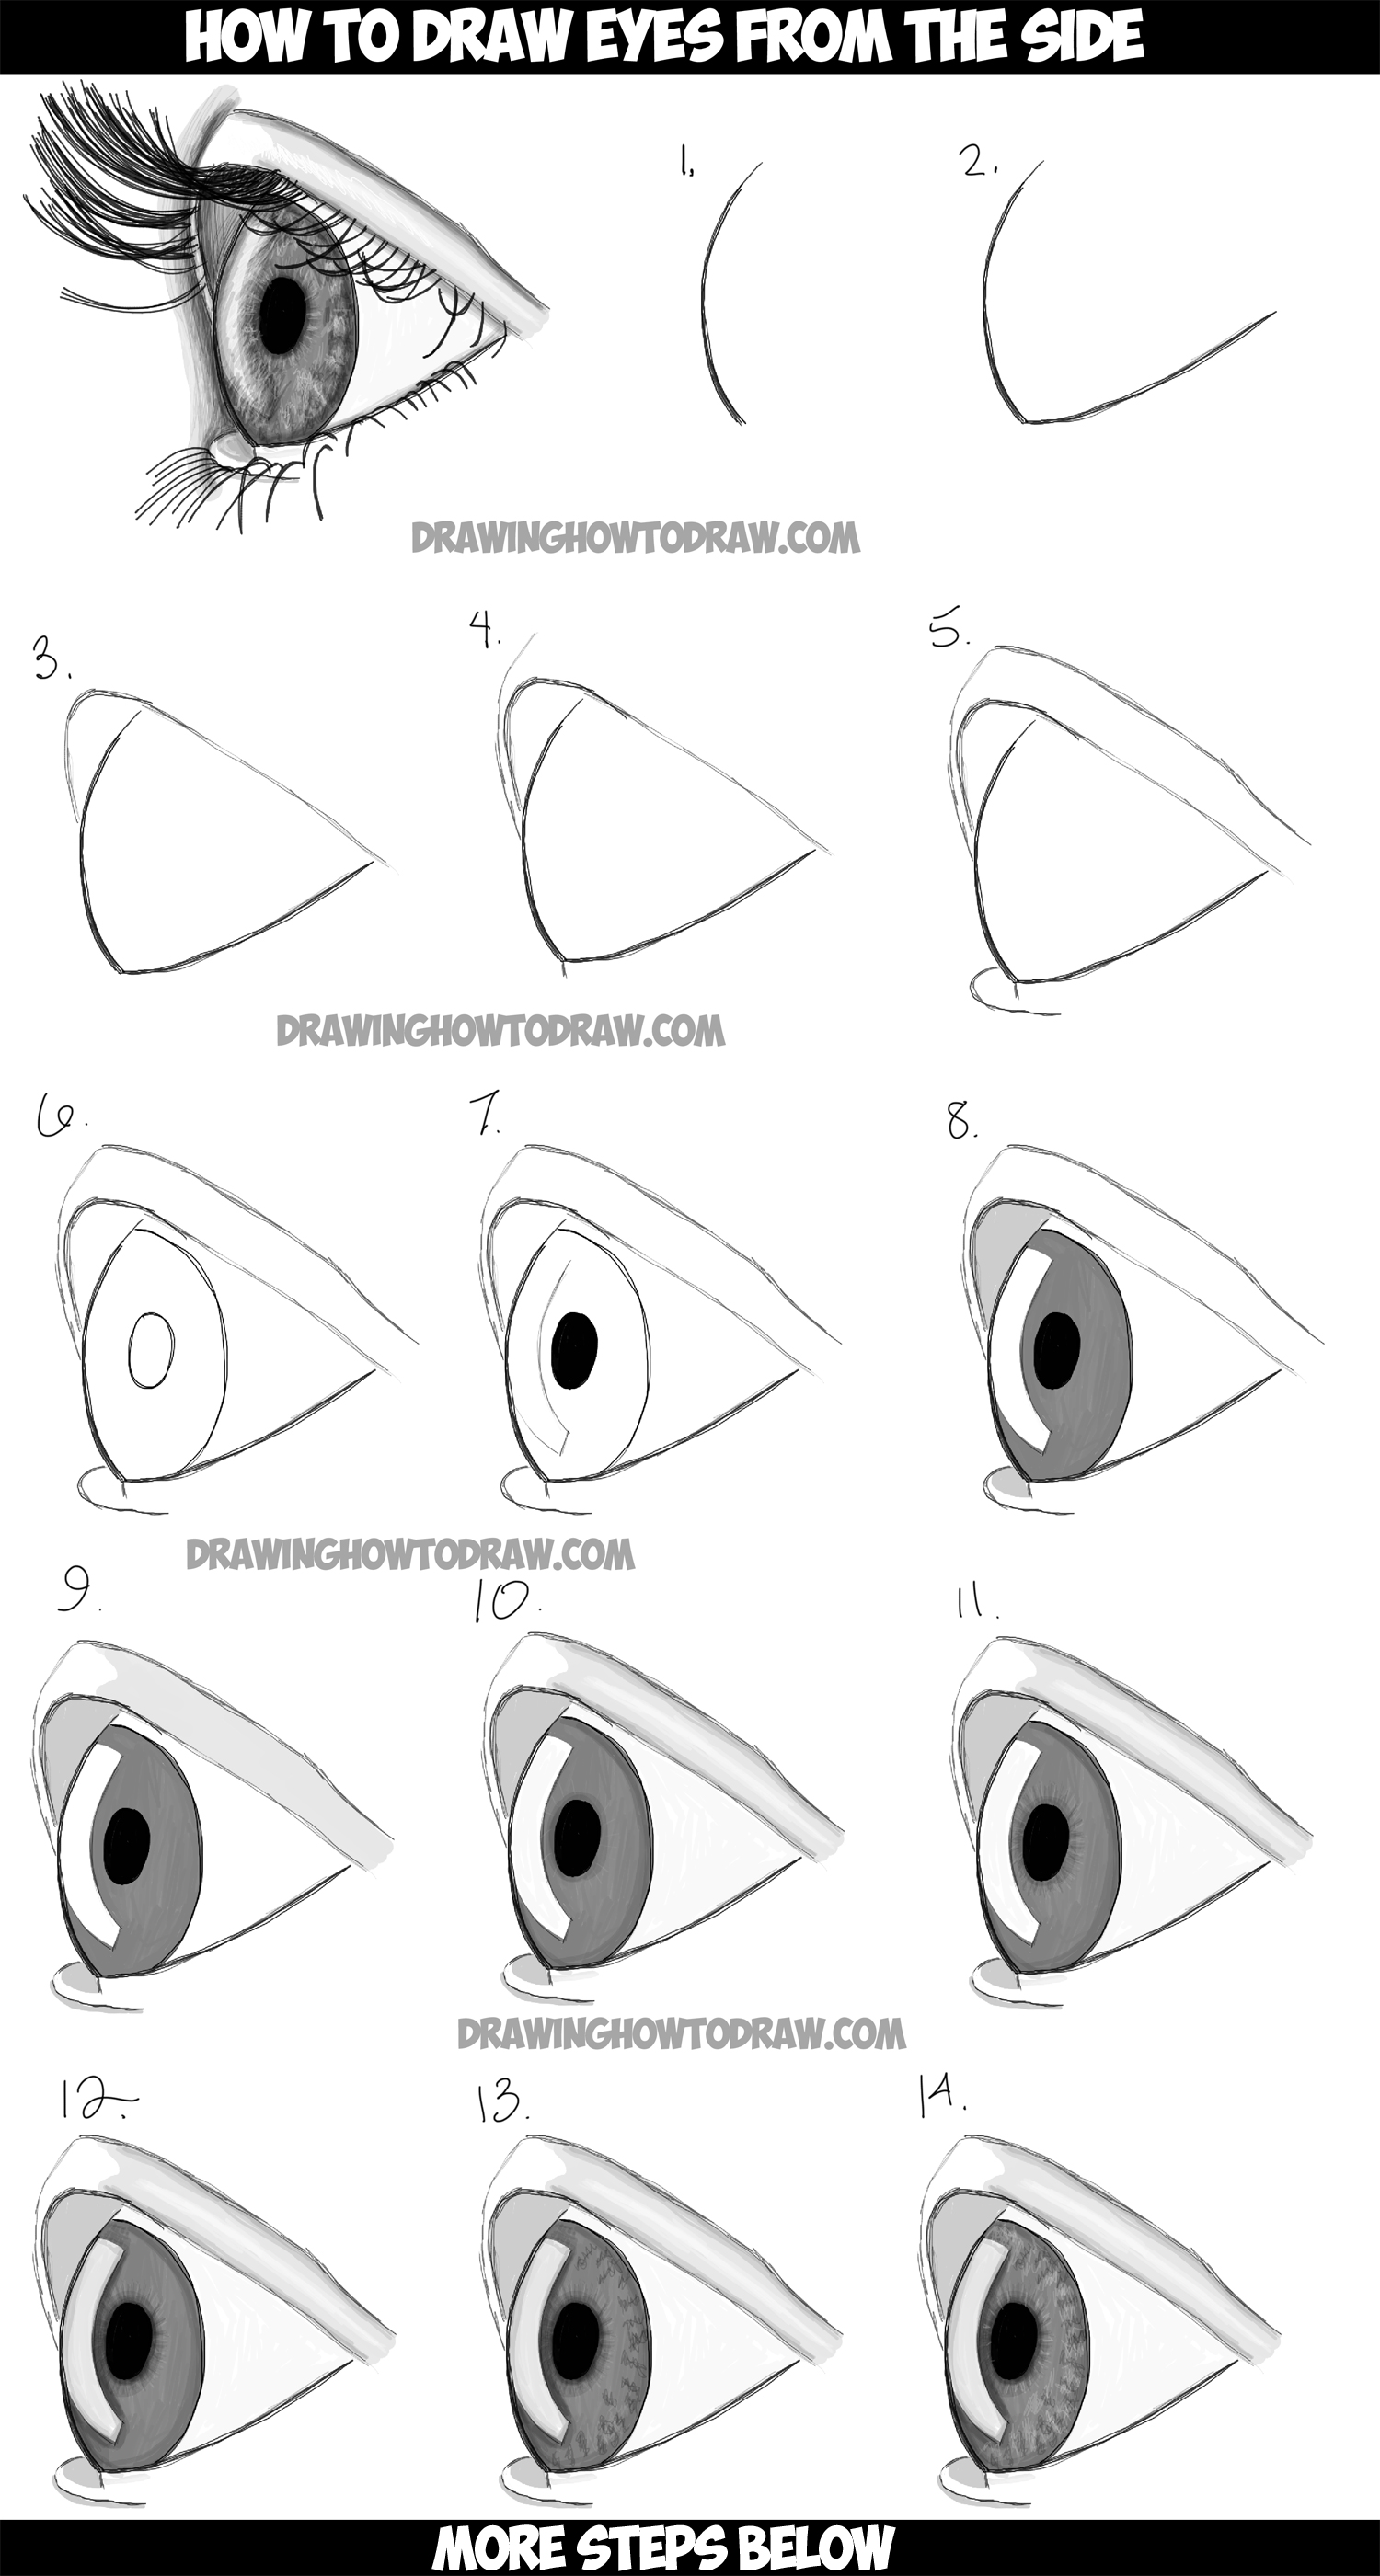 How to Draw Realistic Eyes from the Side Profile View - Step by Step Drawing Tutorial